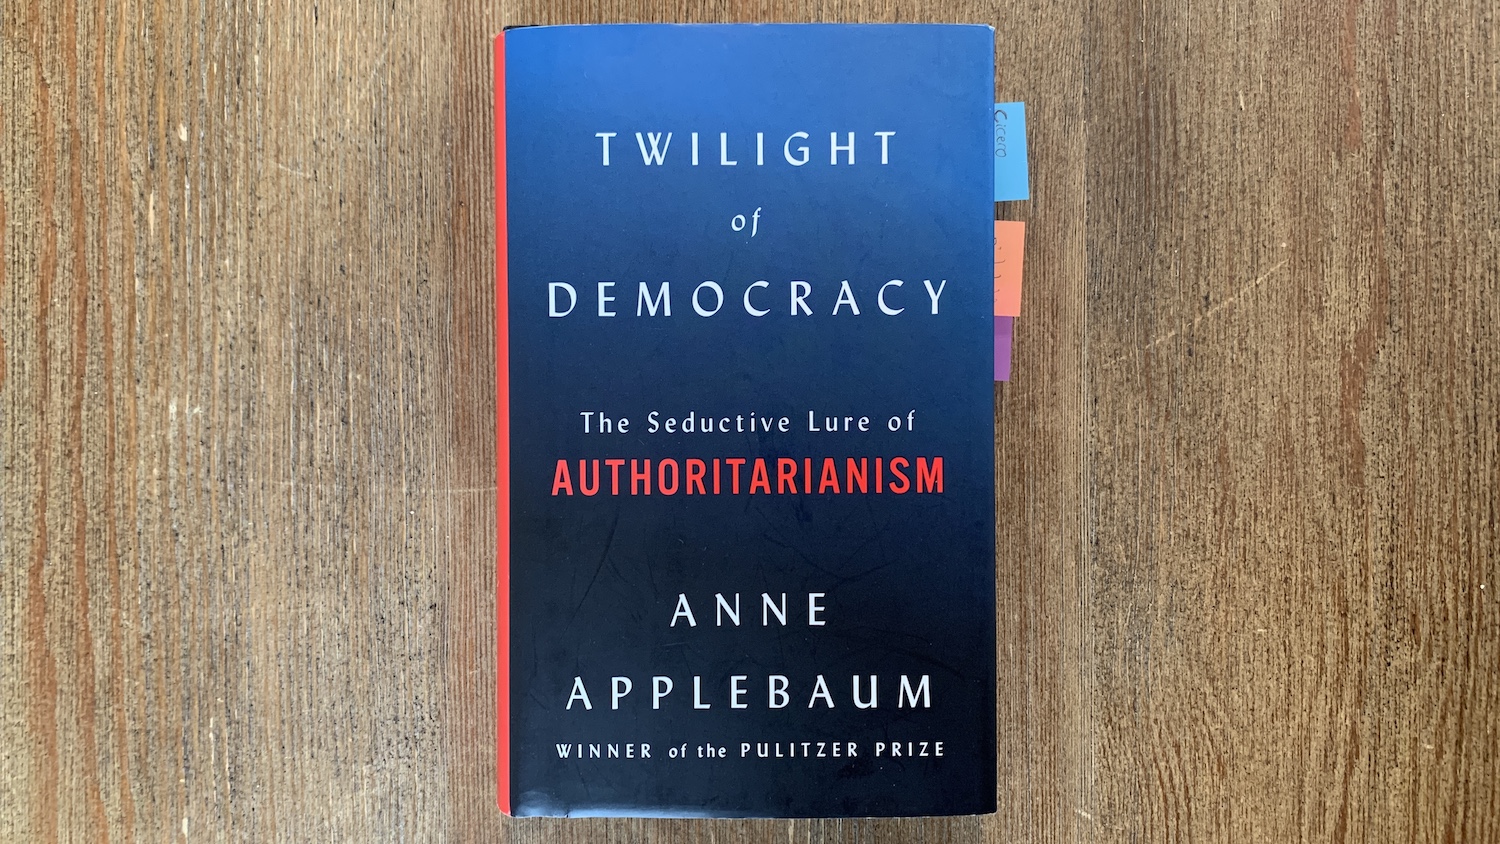 Picture of the book Twilight of Democracy by Anne Applebaum